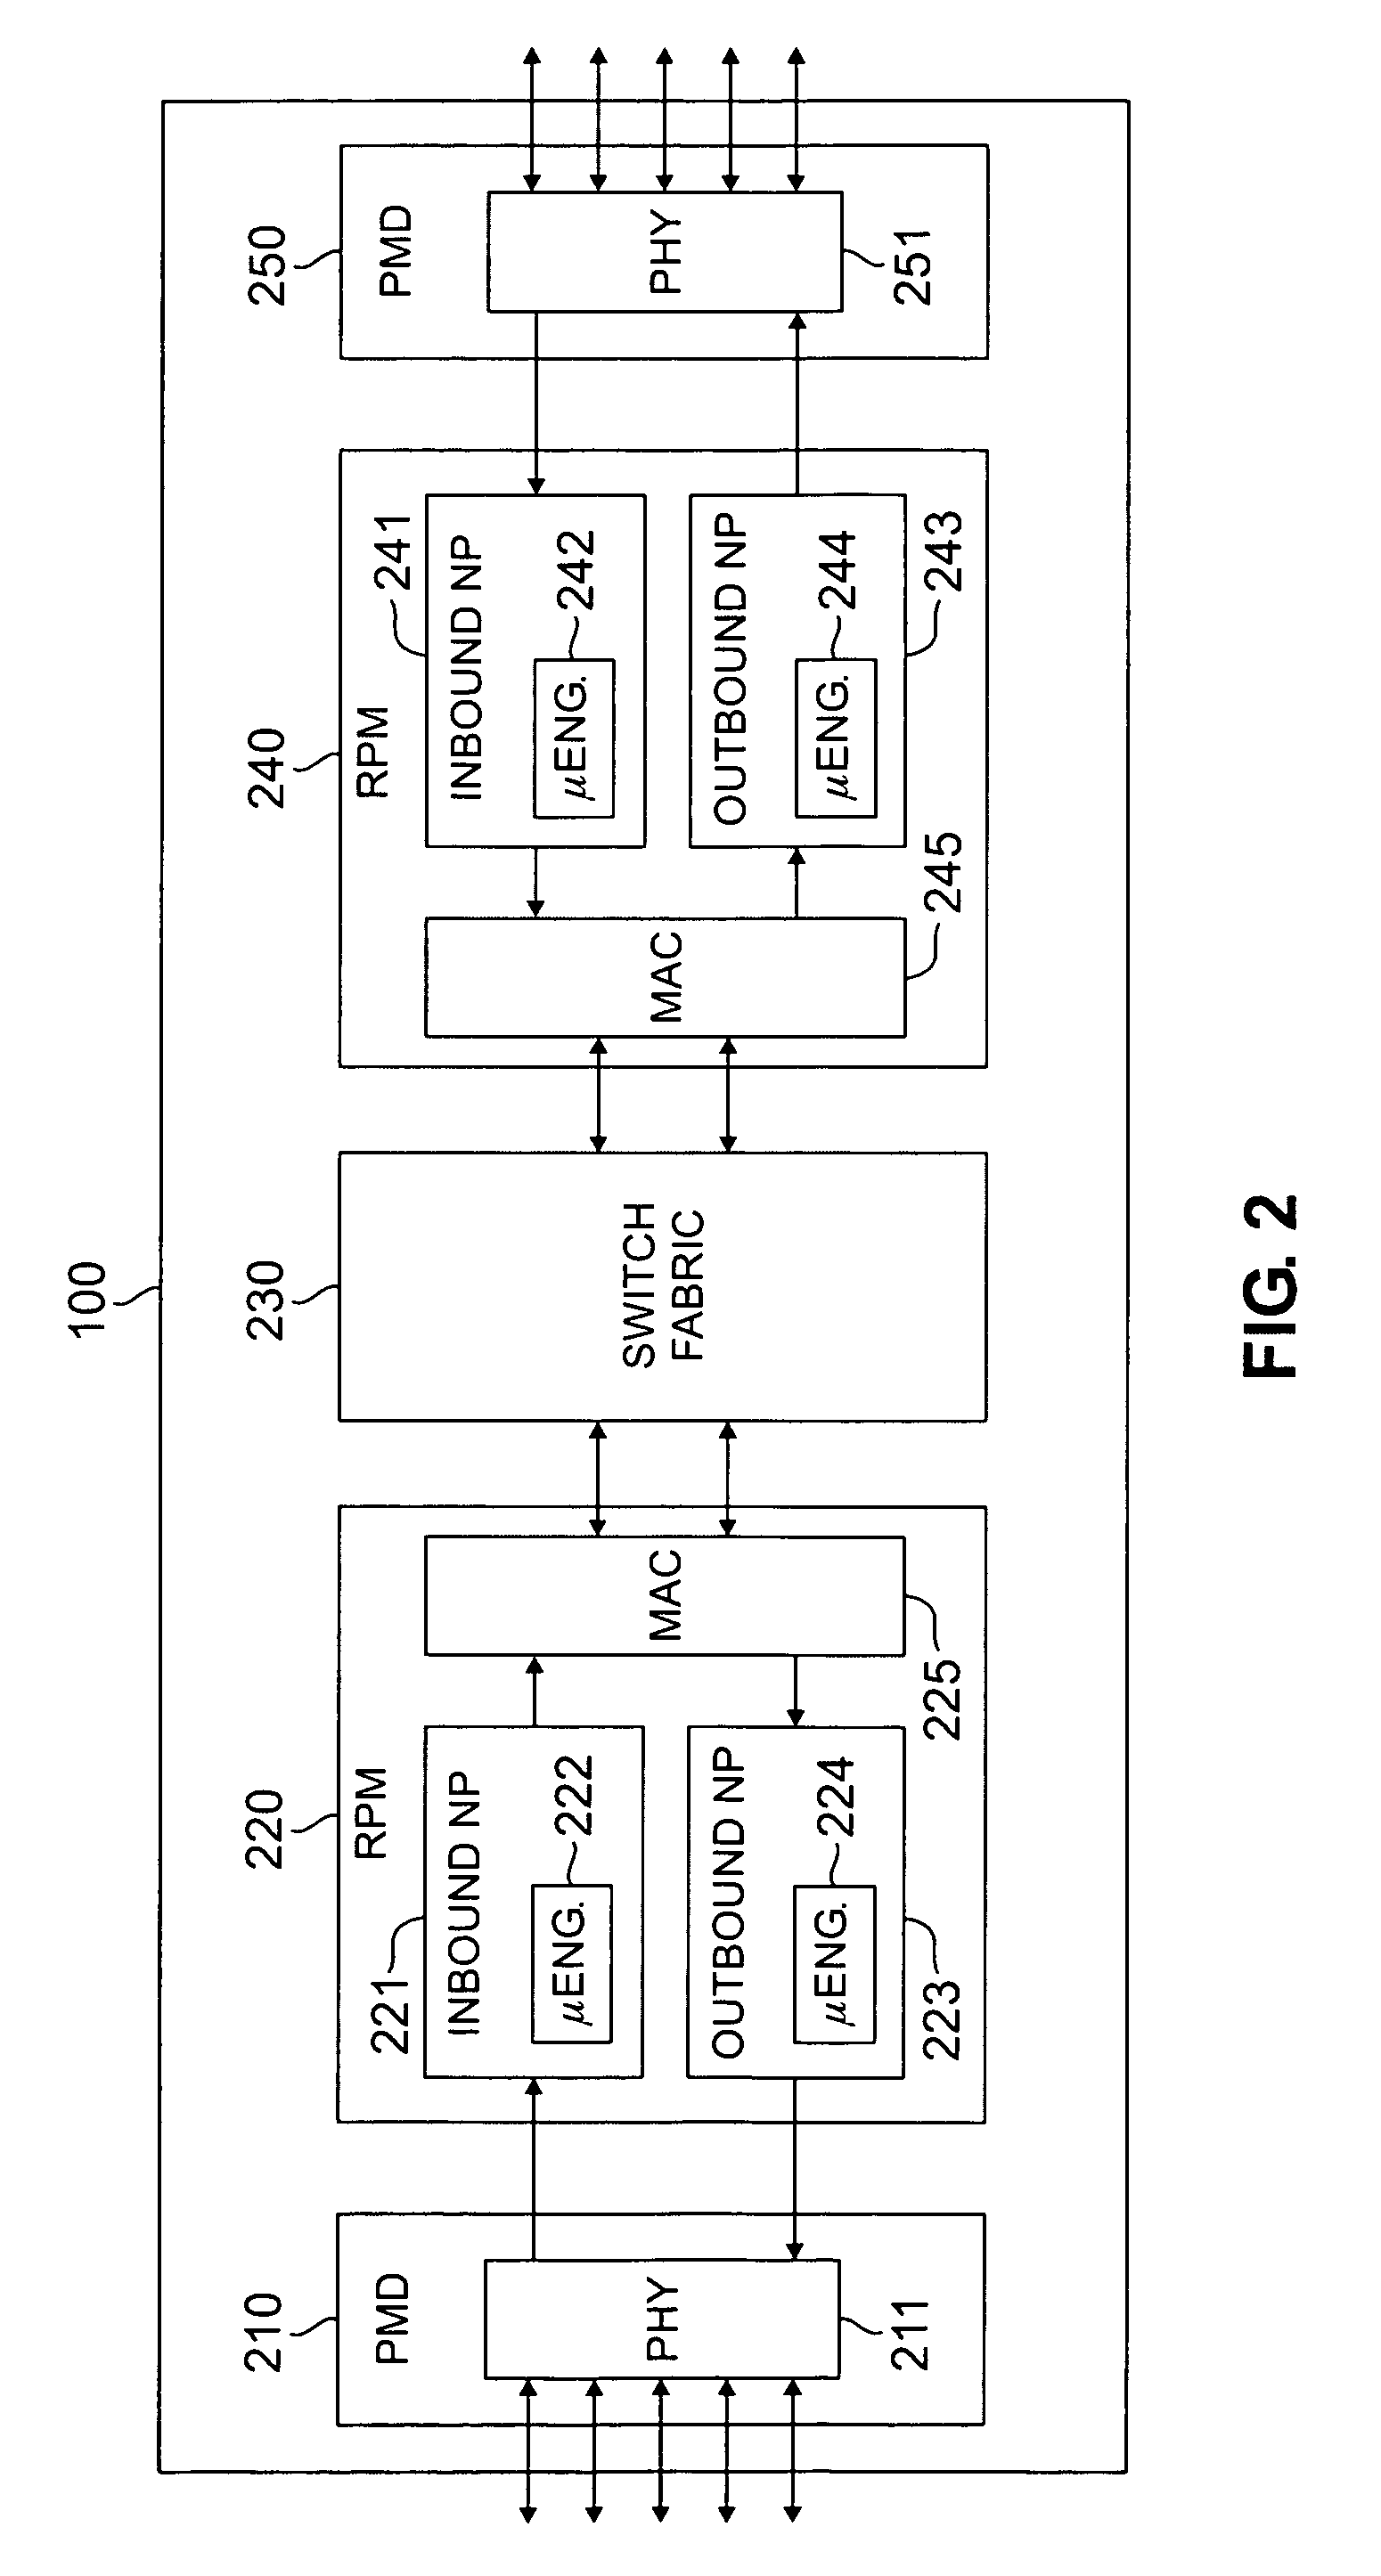 Apparatus and method for performing security and classification in a multiprocessor router